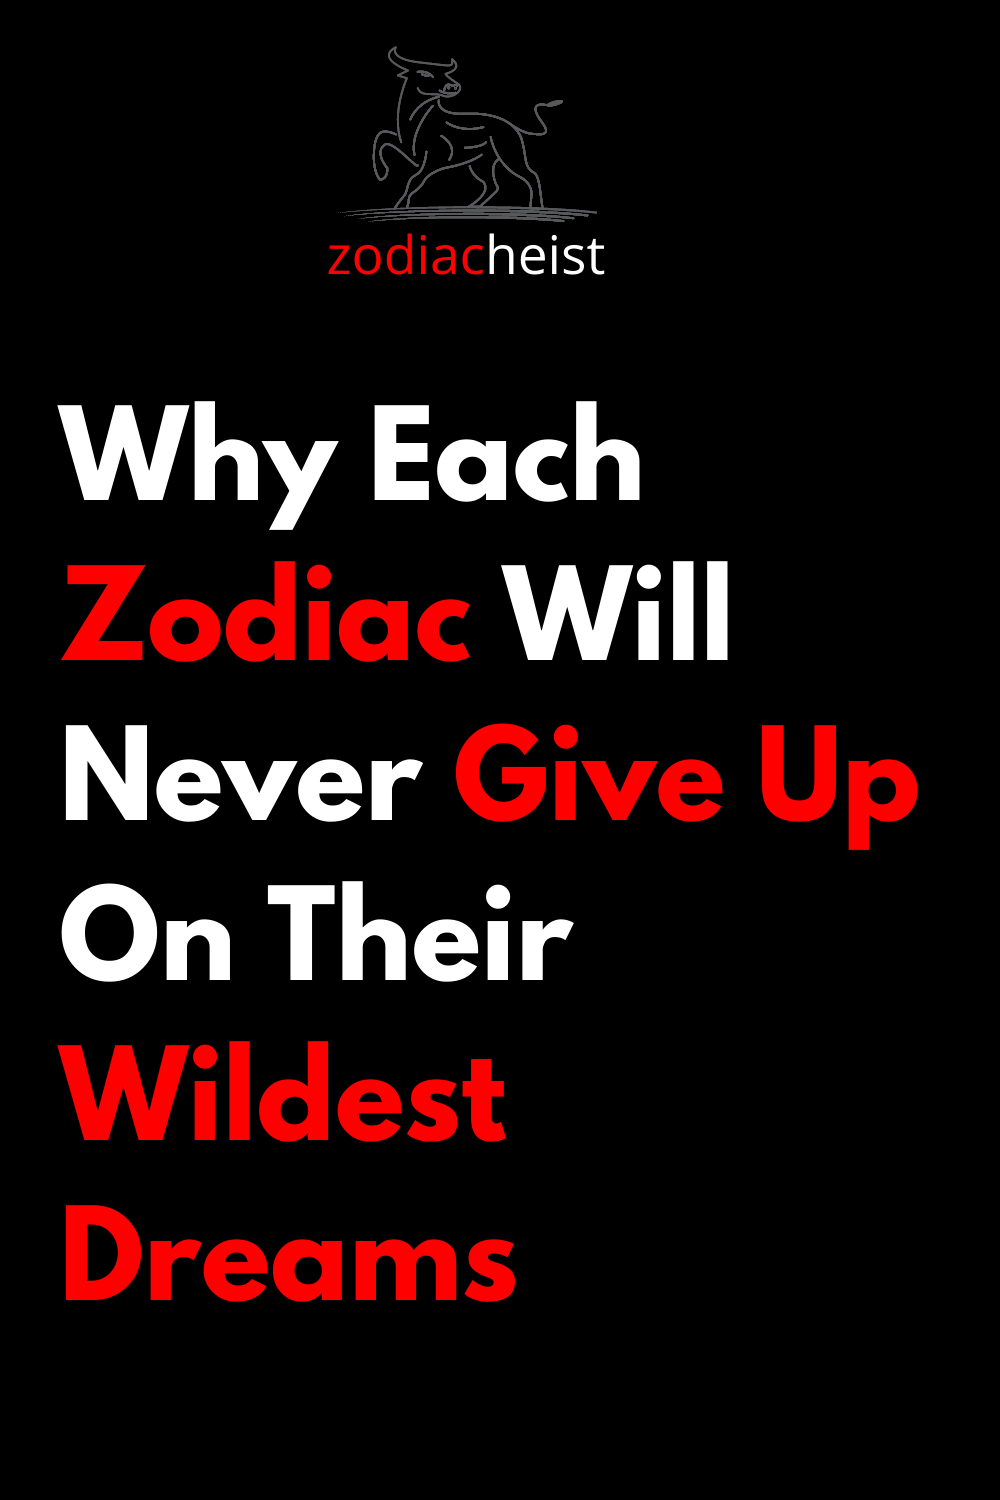 Why Each Zodiac Will Never Give Up On Their Wildest Dreams